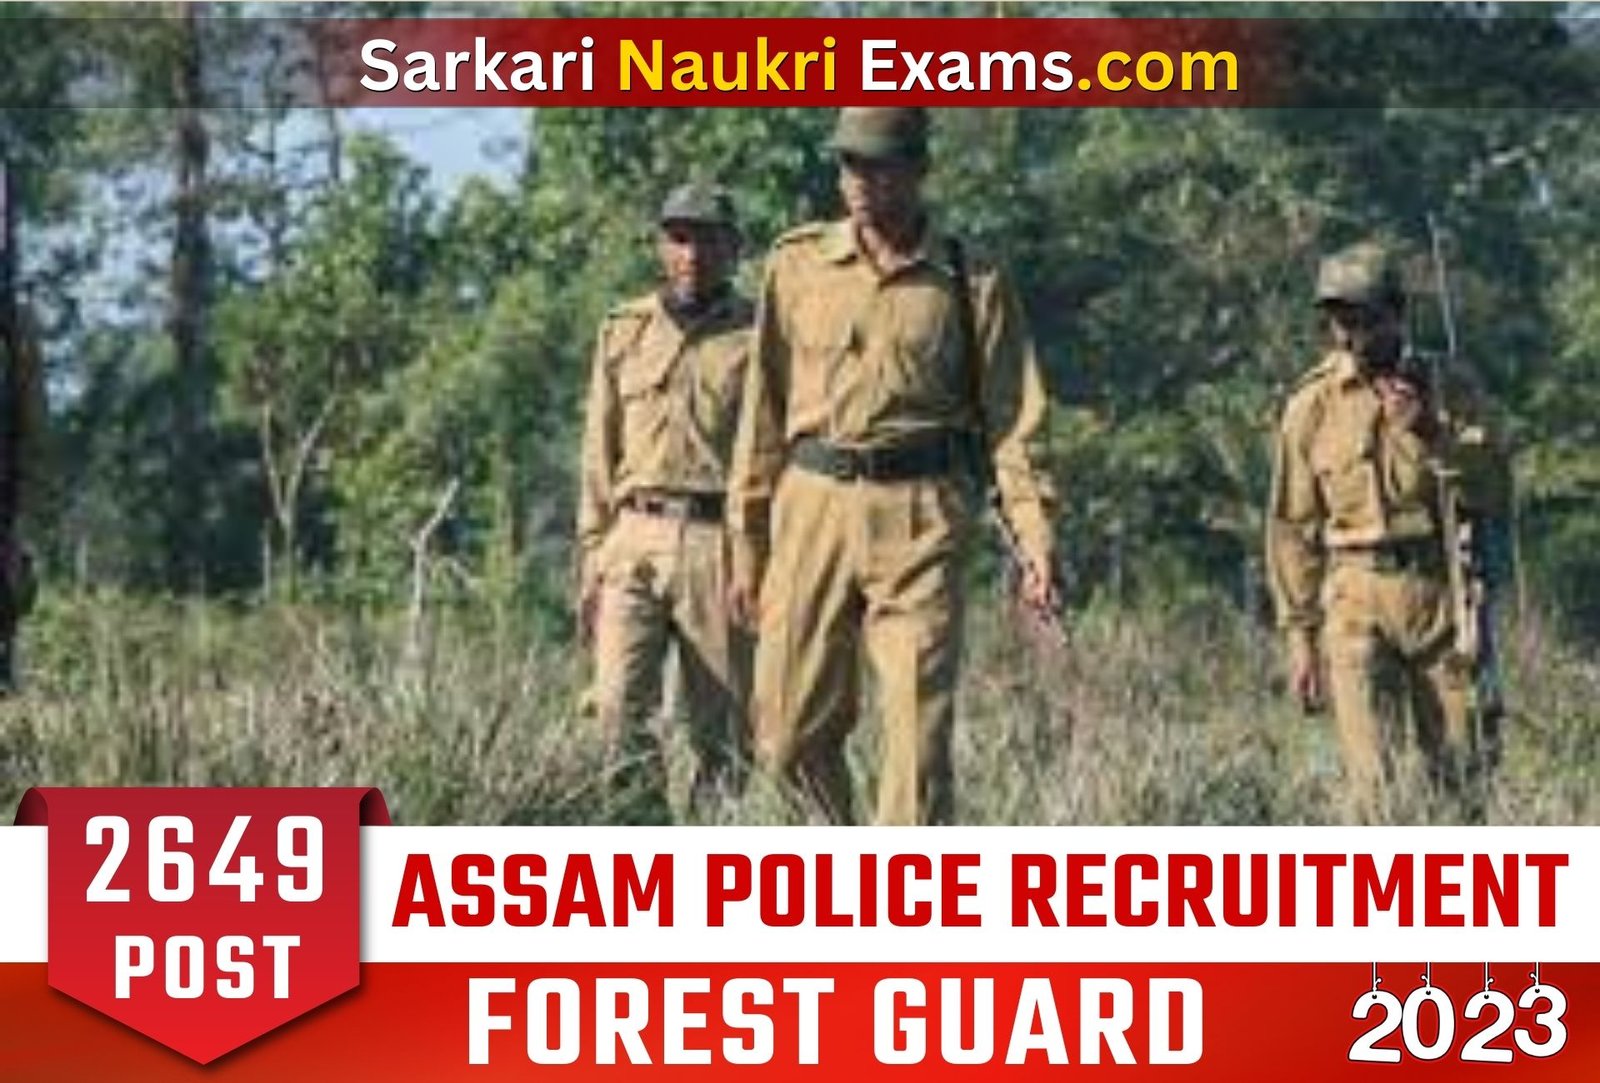 Assam Police Forest Guard Recruitment 2023 | 2649 Post Vacancy Apply Online